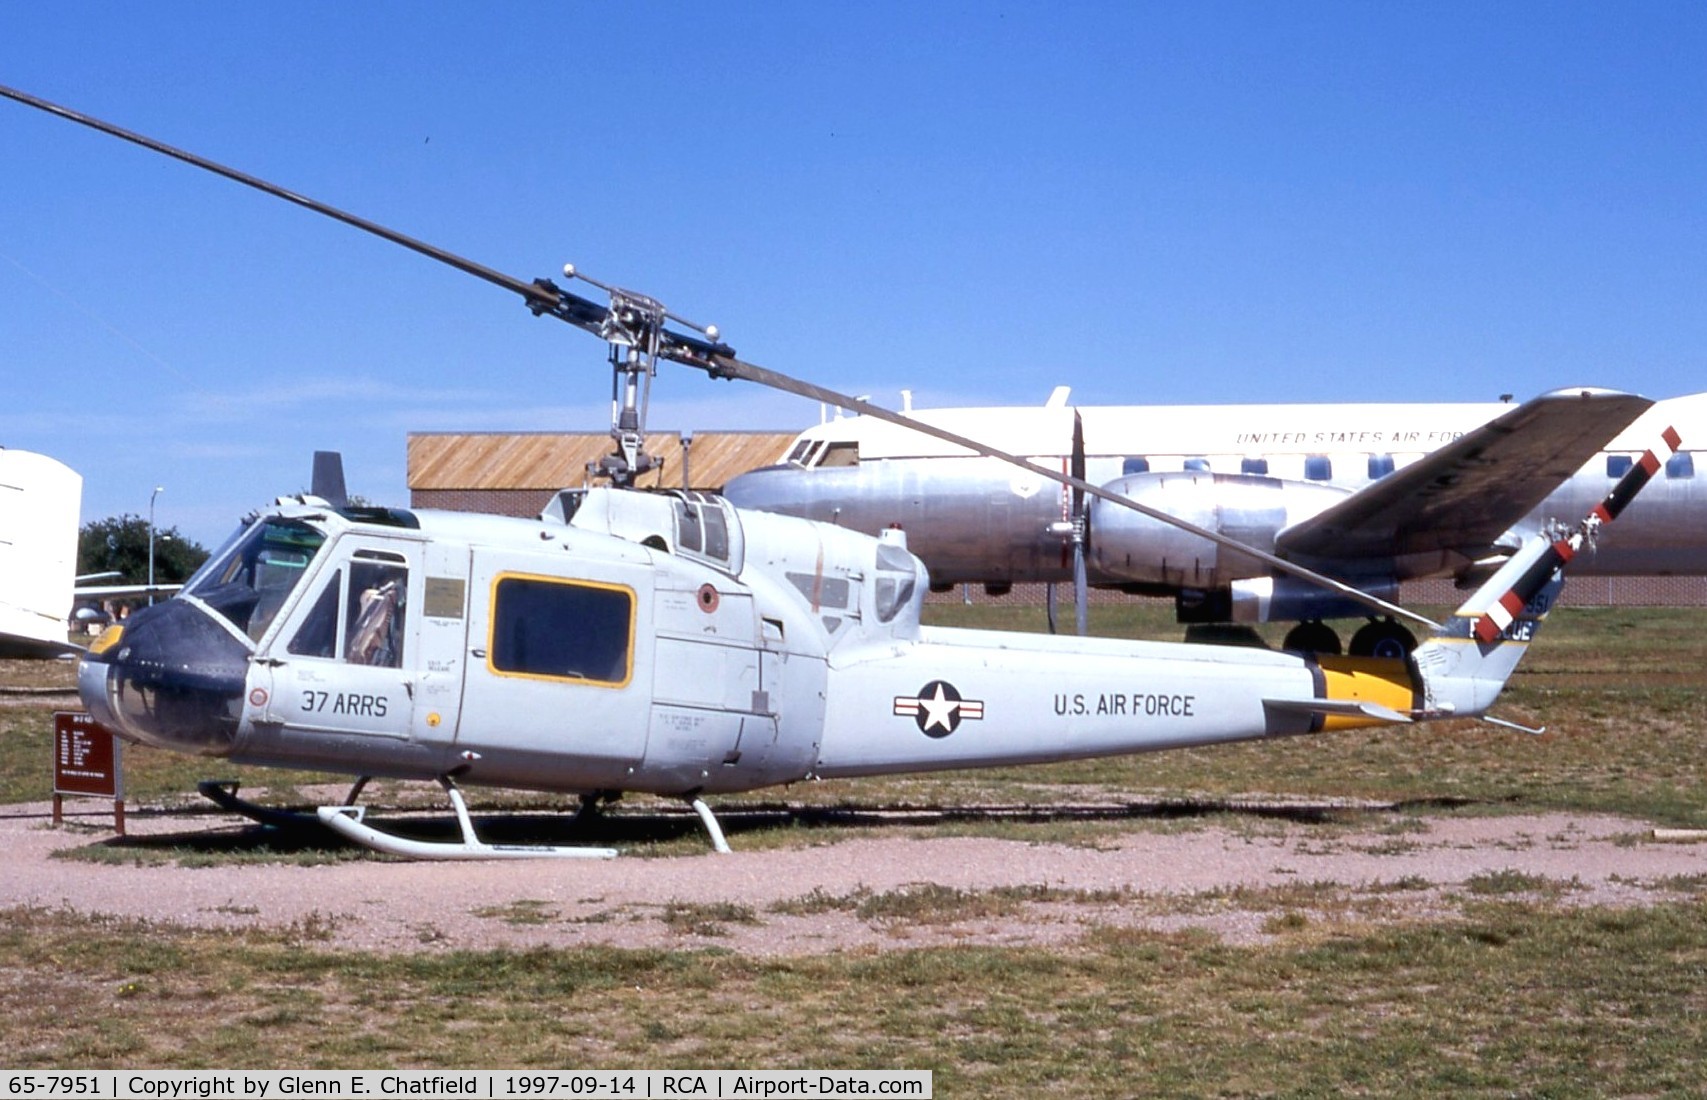 65-7951, 1965 Bell UH-1F Iroquois C/N 7092, HU-1F at the South Dakota Air & Space Museum